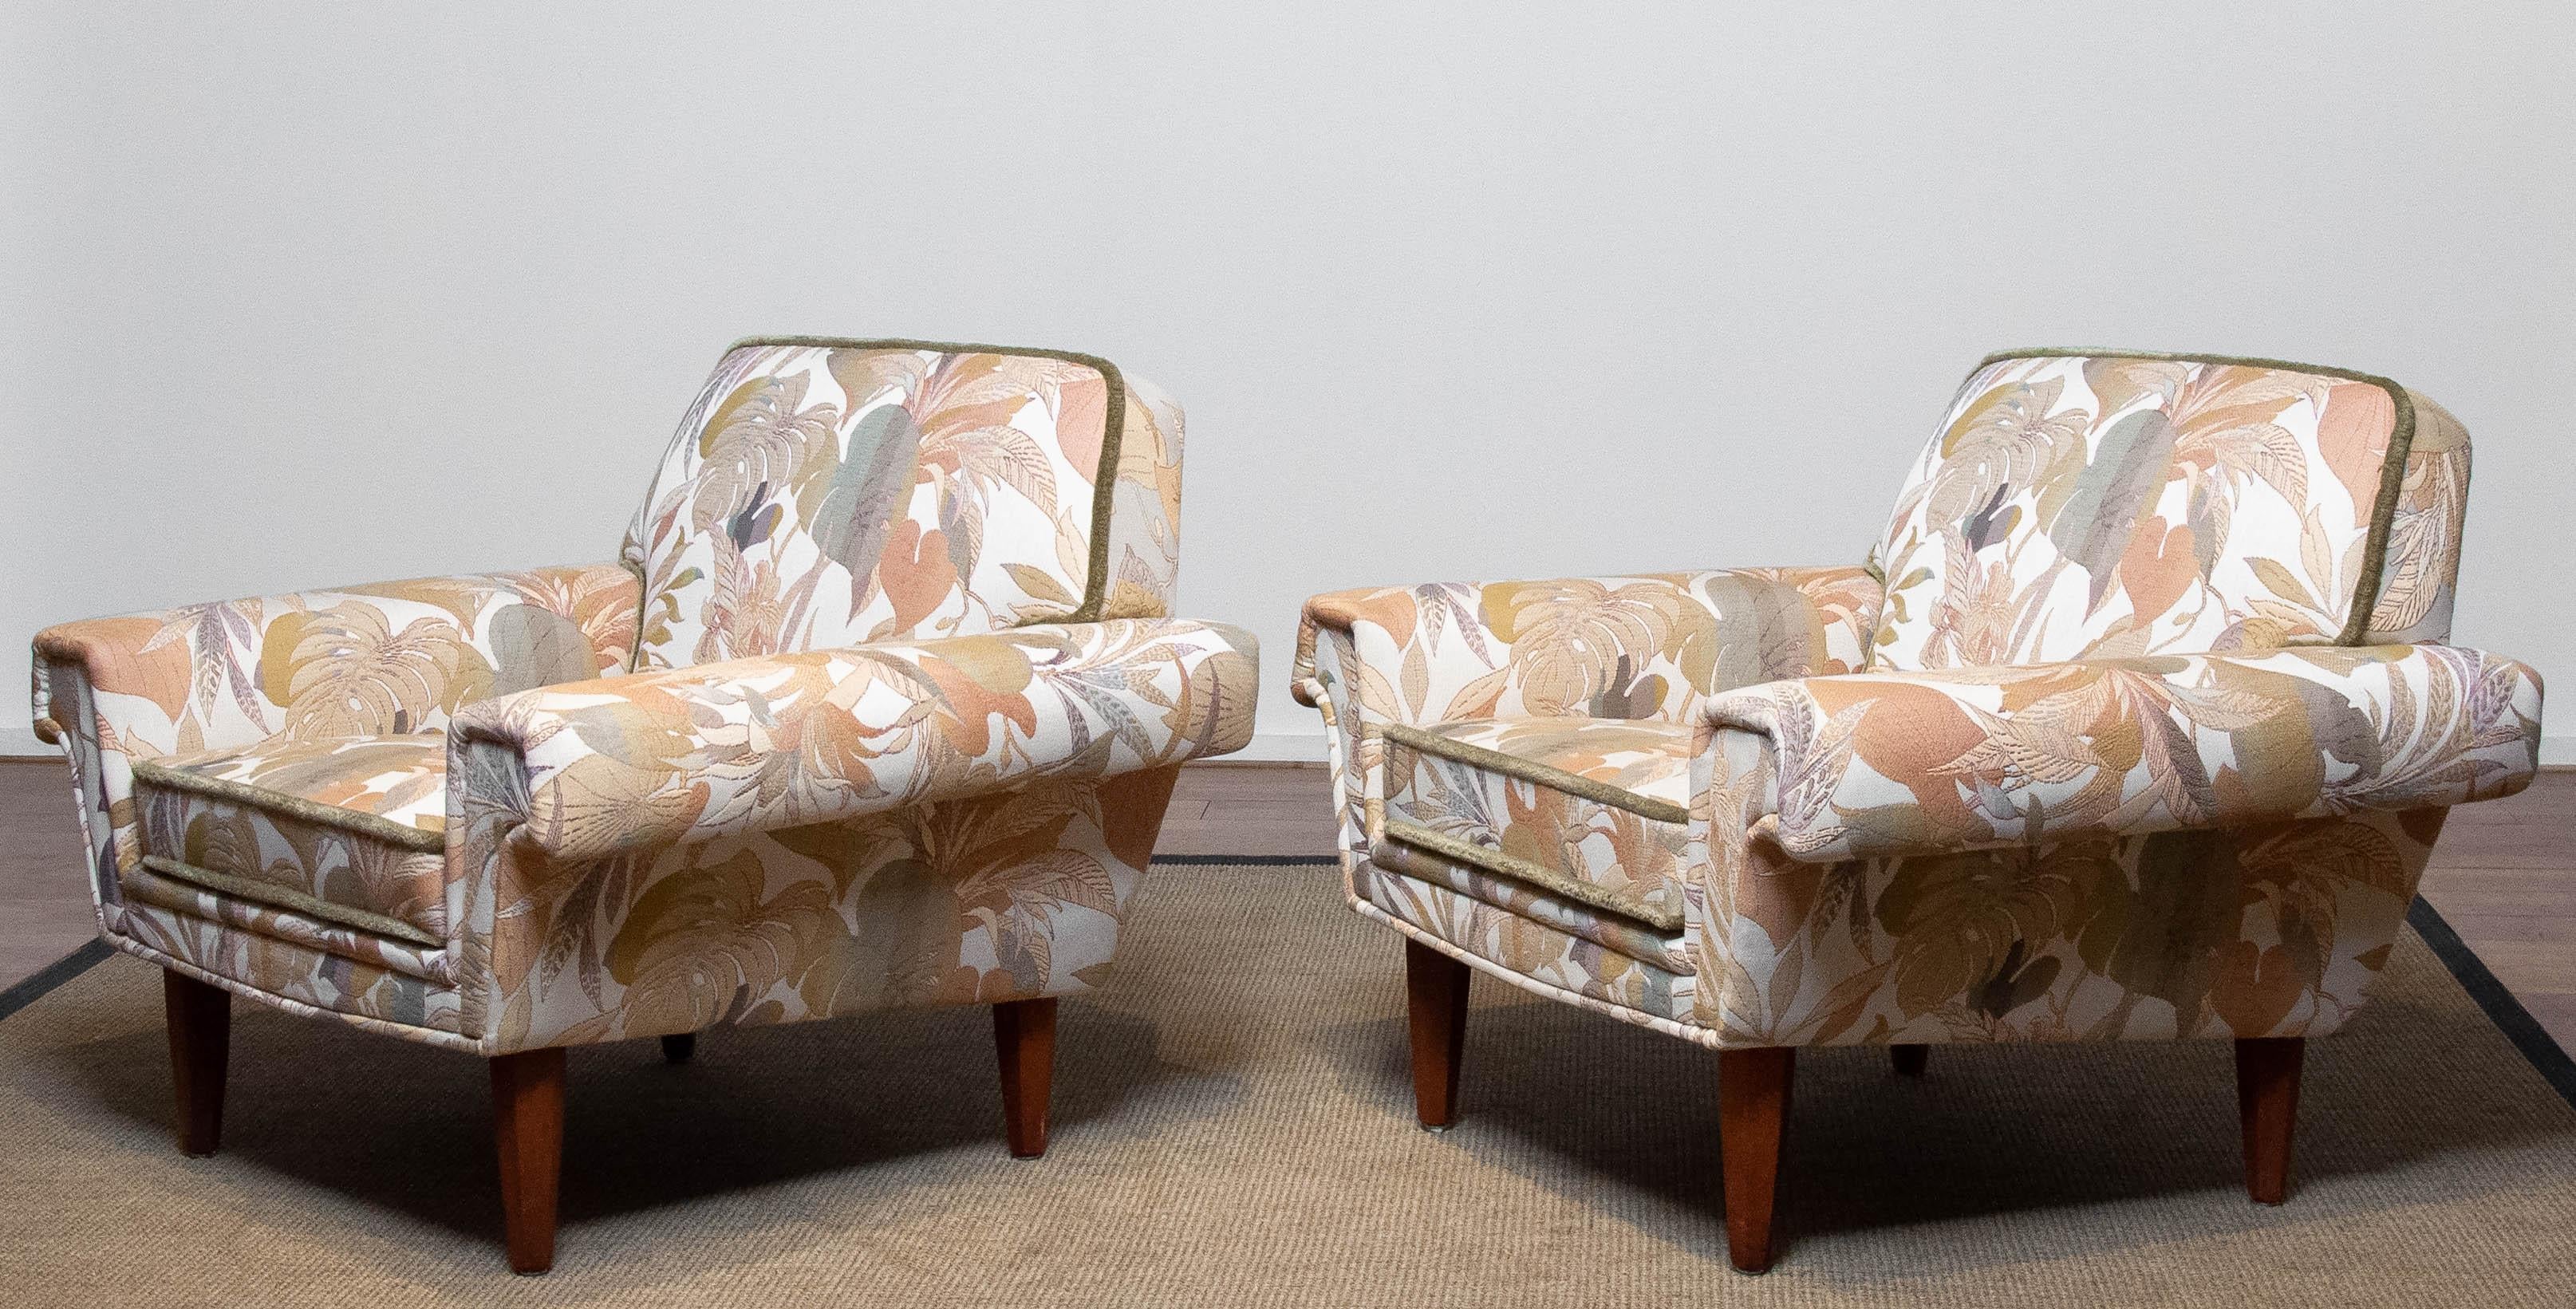 Pair Low Back Lounge Chairs Upholstered Floral Jacquard Fabric From Denmark 1970 For Sale 7